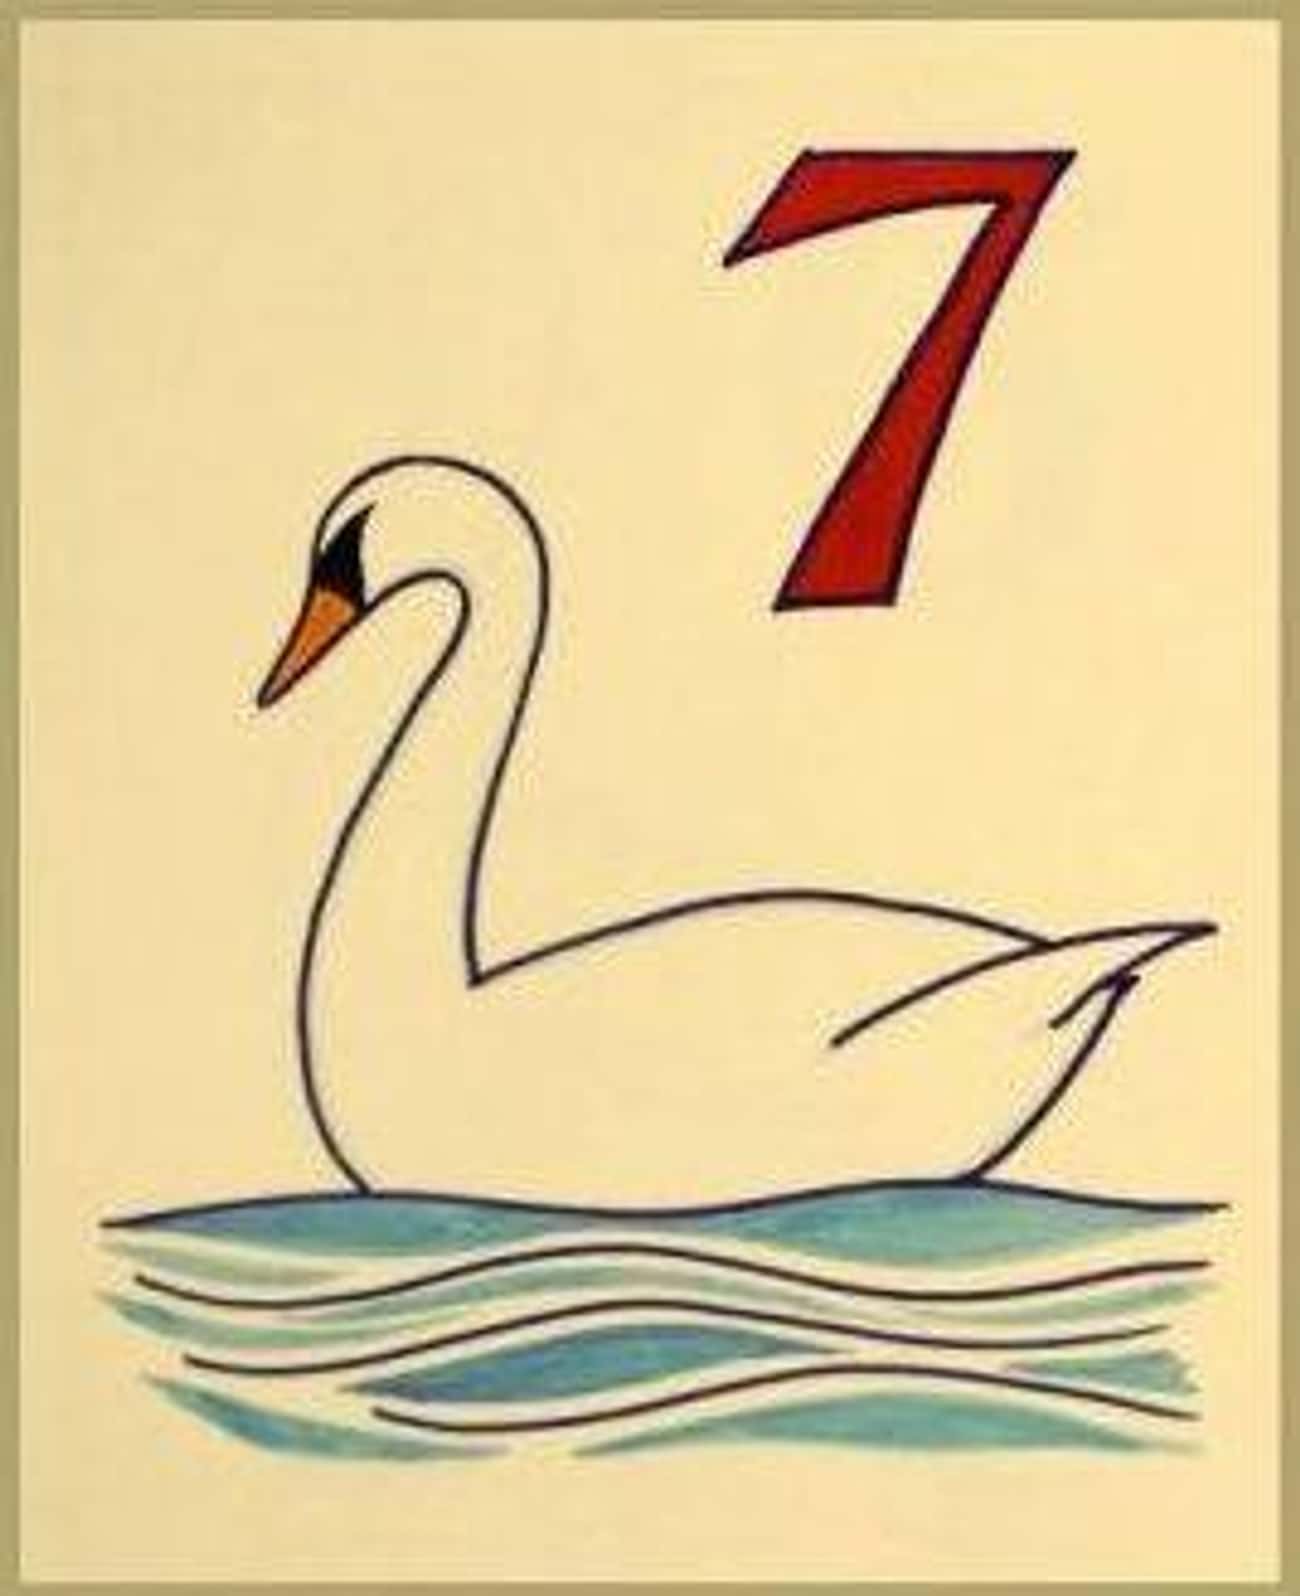 Seven Swans-A-Swimming